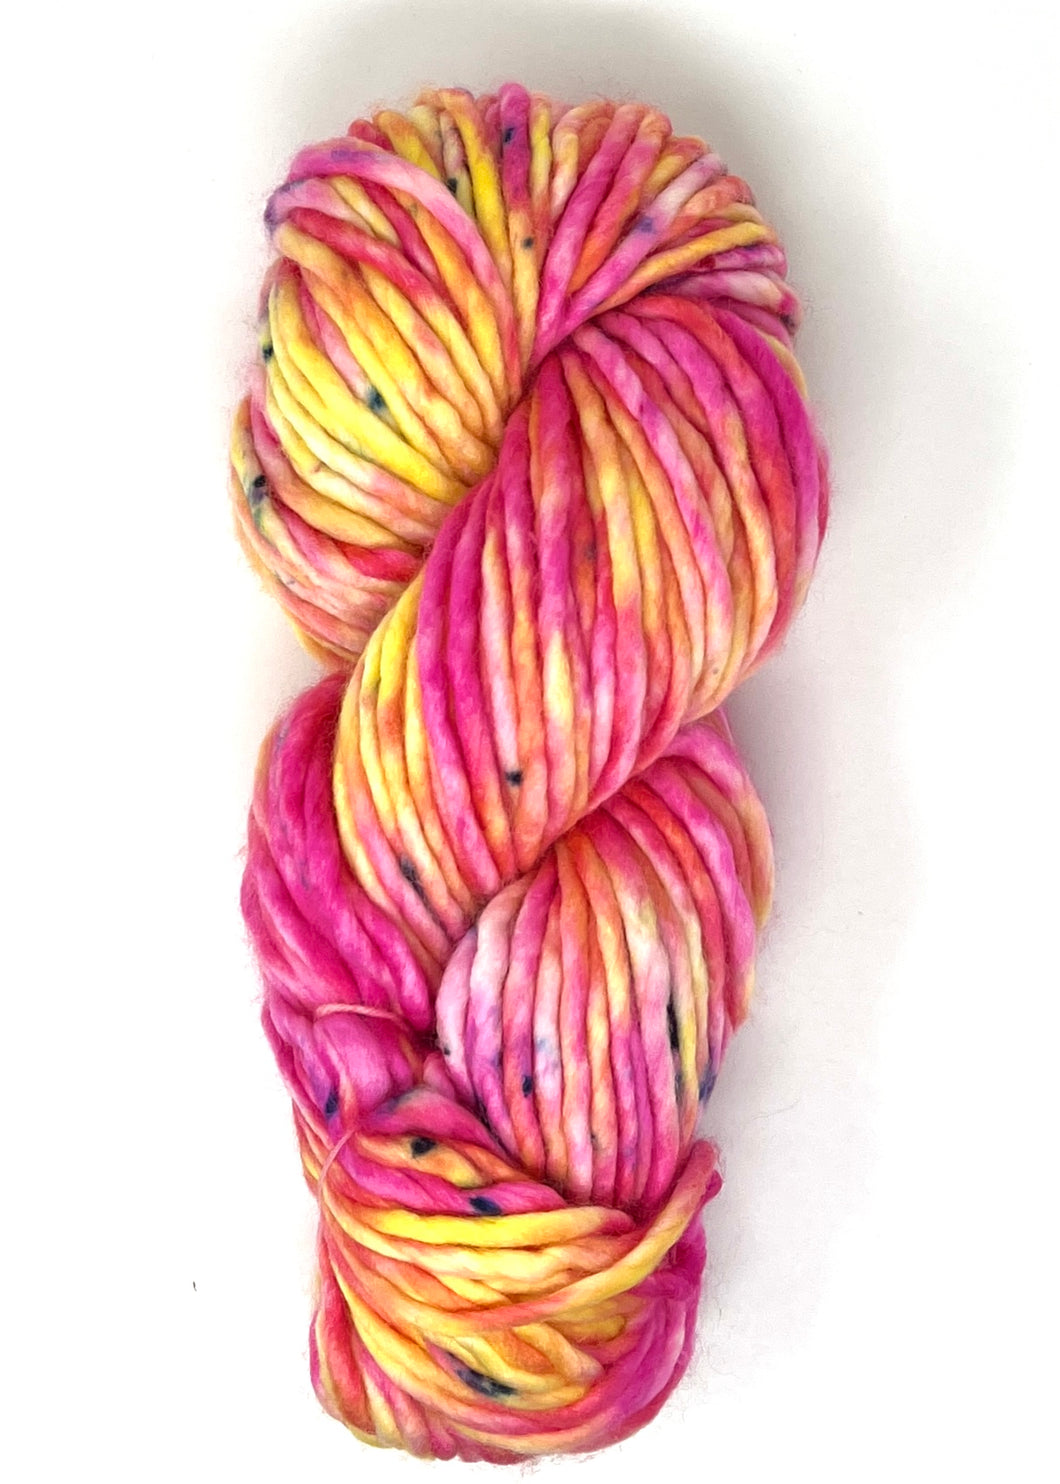 Baah Yarn Mammoth Pink Promise Pink and Yellow Variegated Yarn